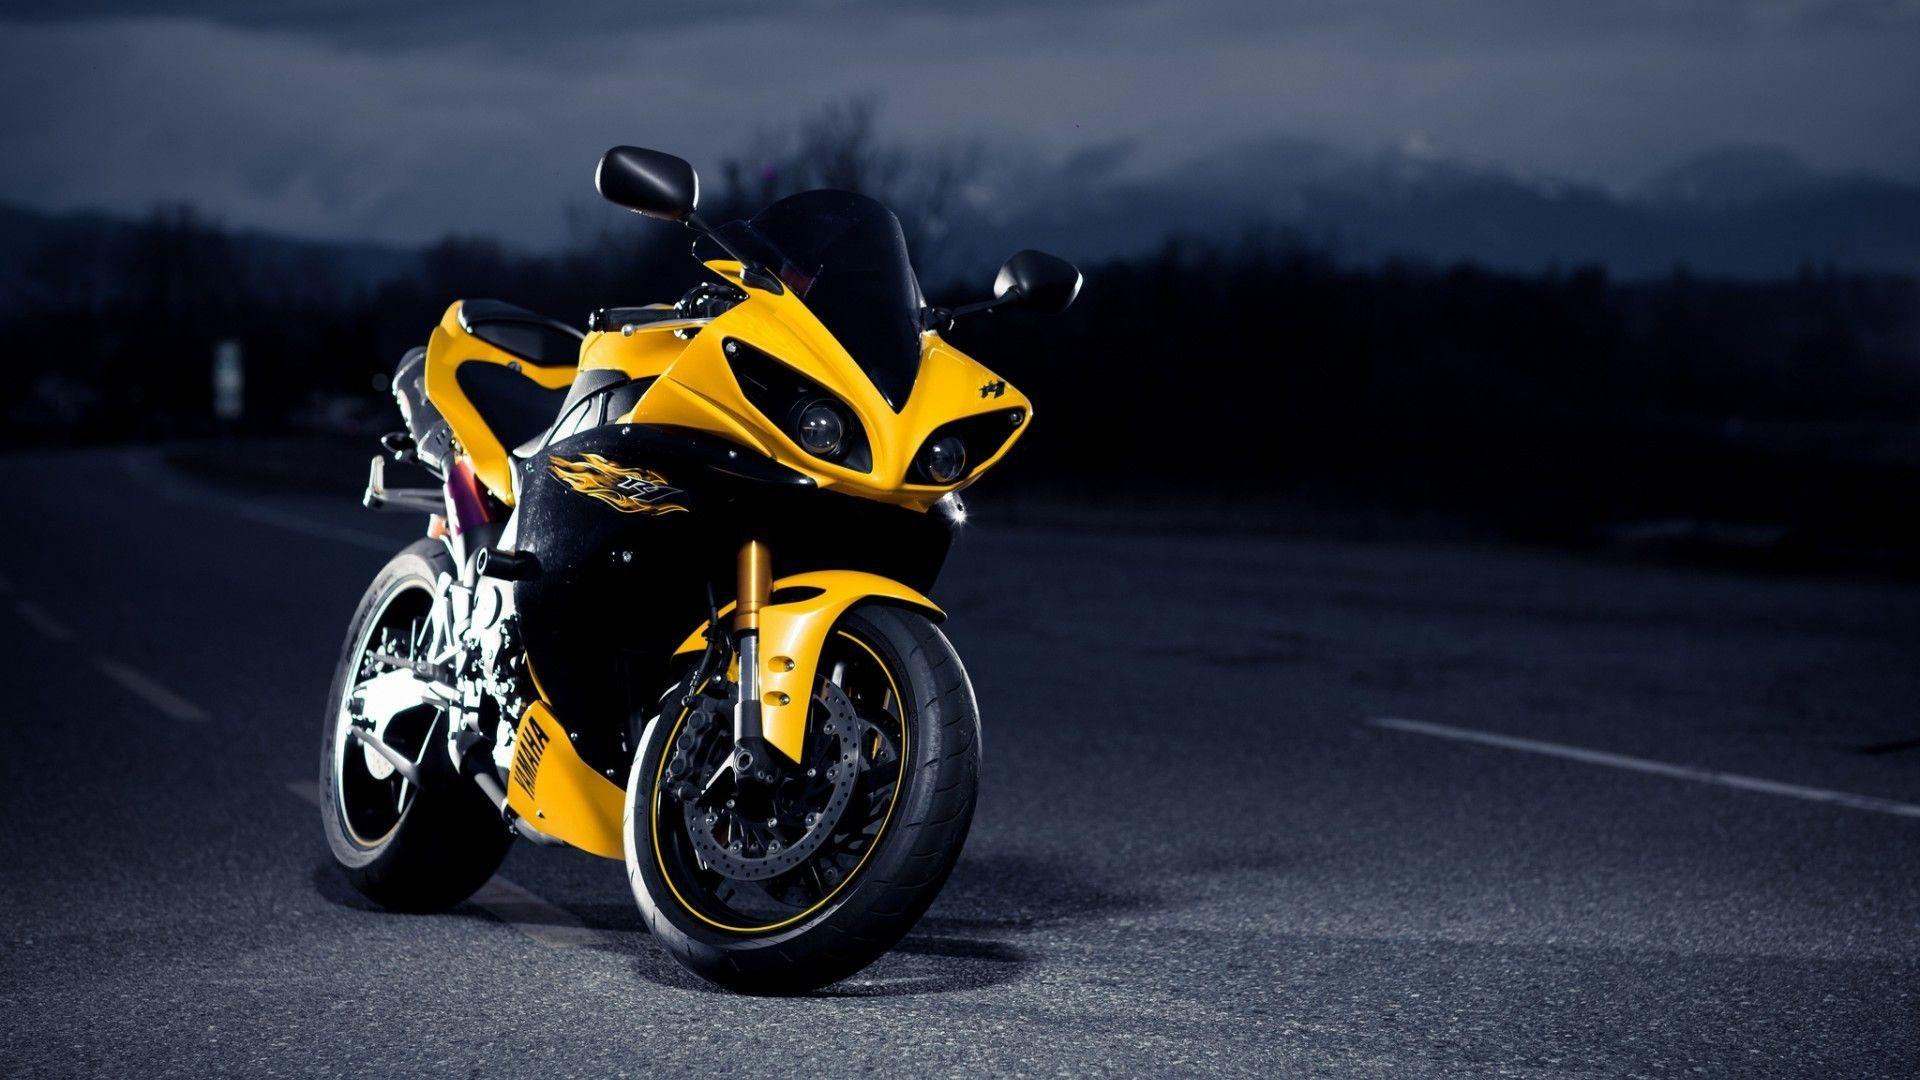 Yamaha YZF R1 Wallpapers - Top Free Yamaha YZF R1 Backgrounds